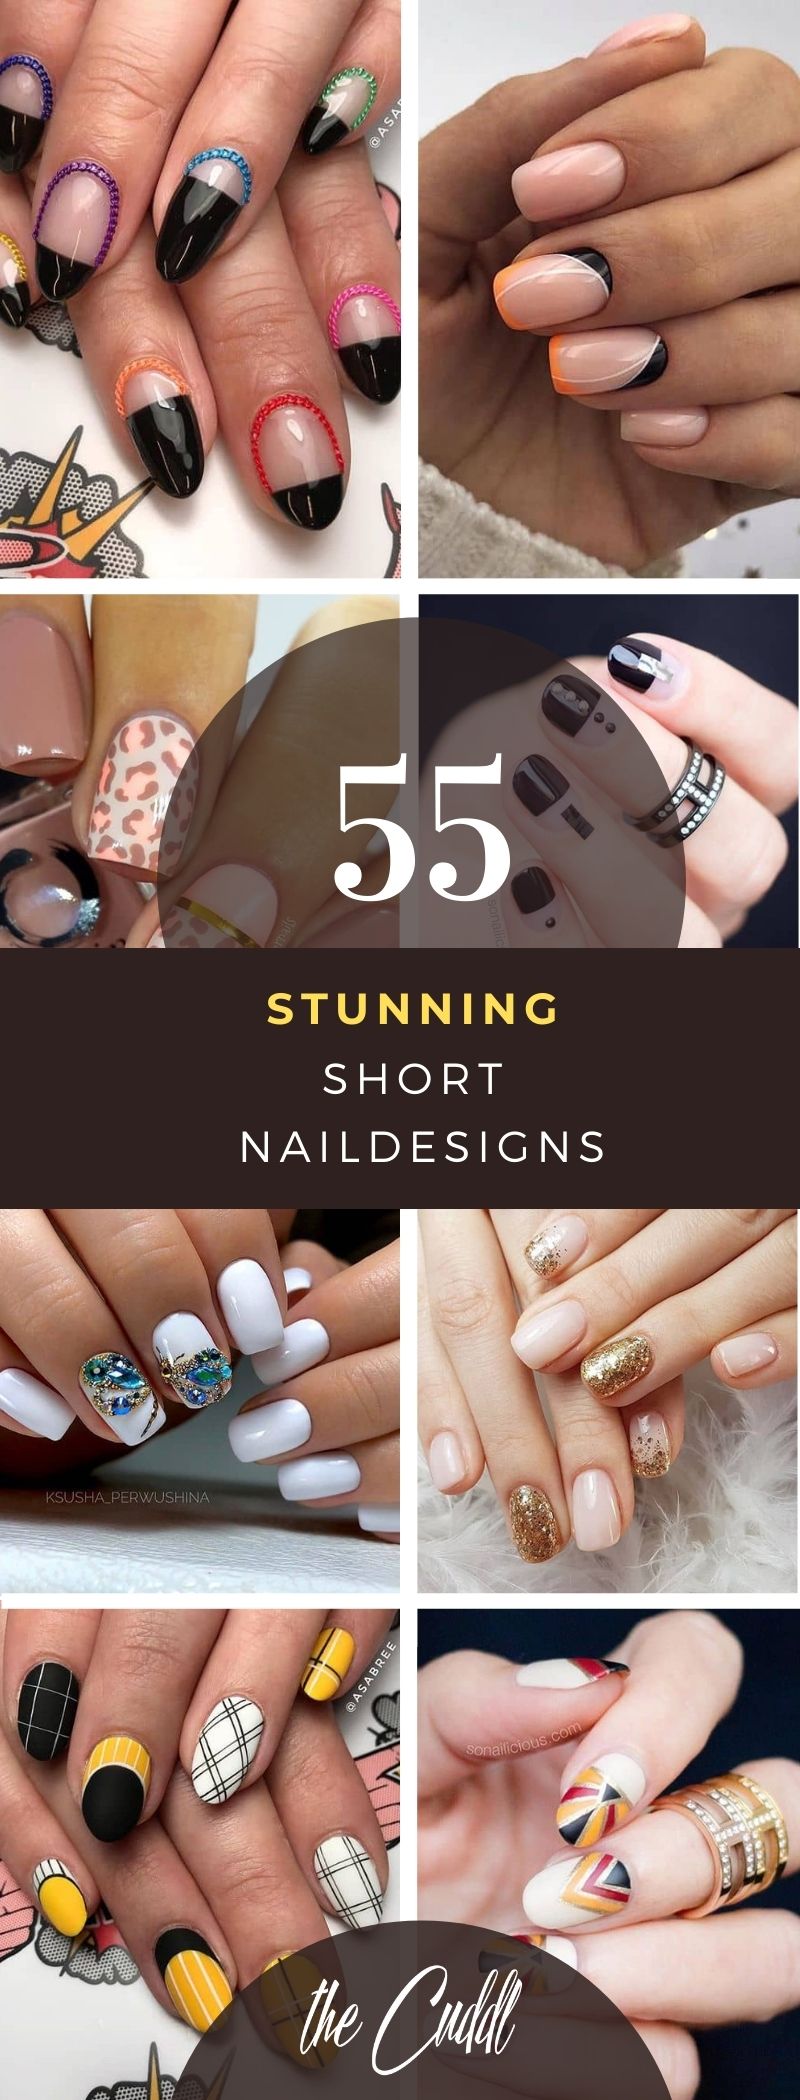 55 Creative Nail Designs for Short Nails to Create Unique Styles